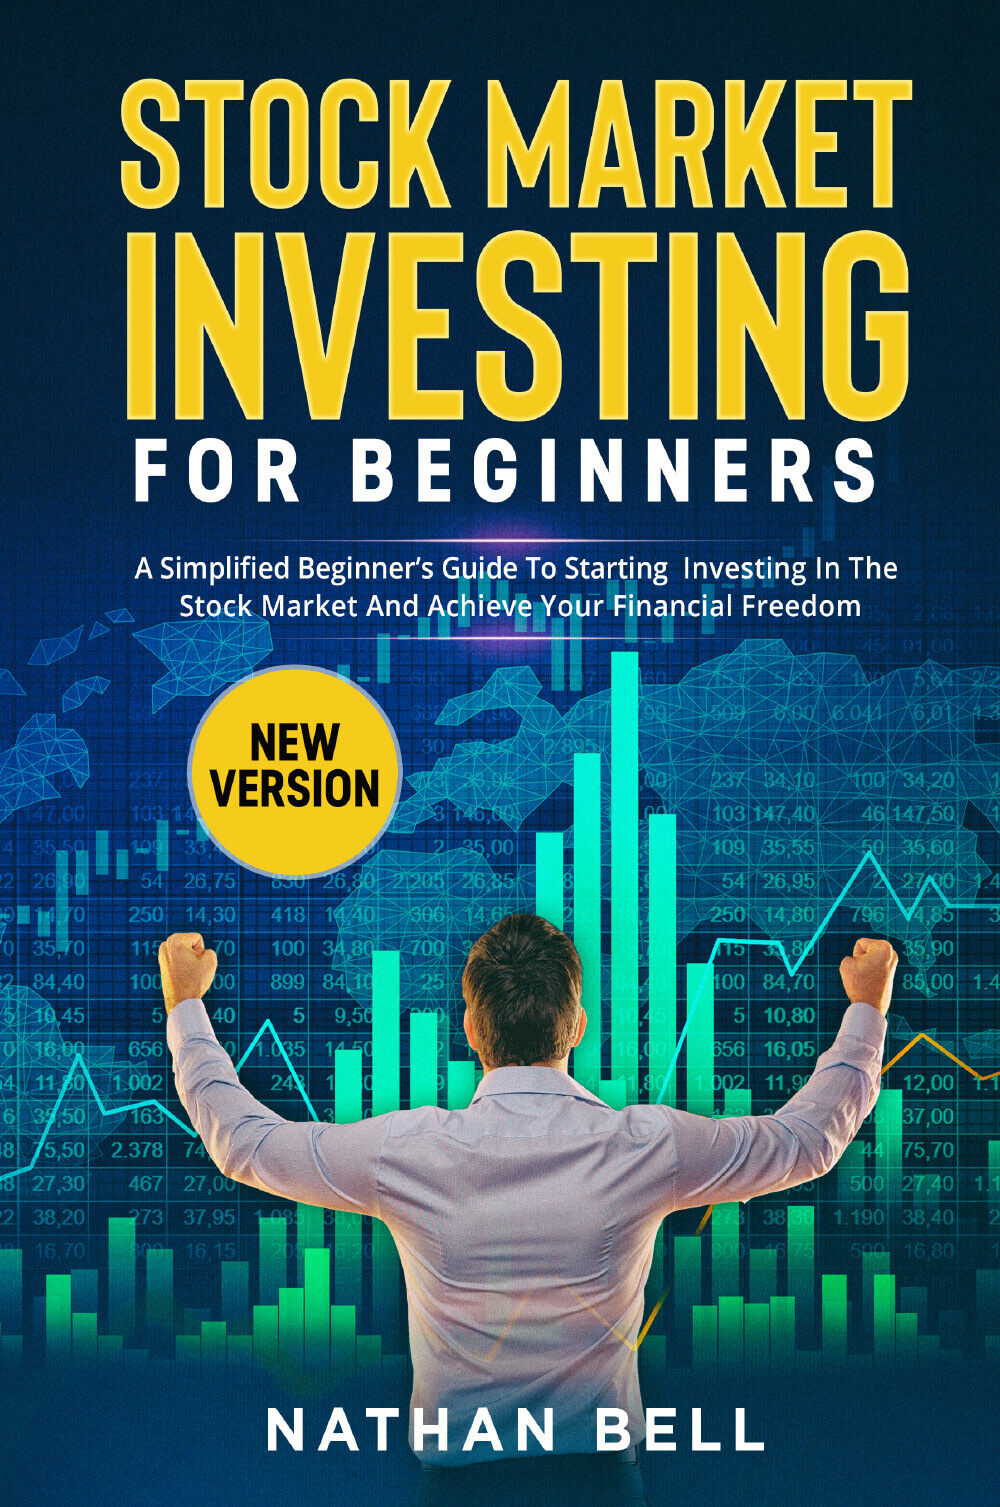 Stock market investing for beginners (New Version). A Simplified Beginner?s Guid